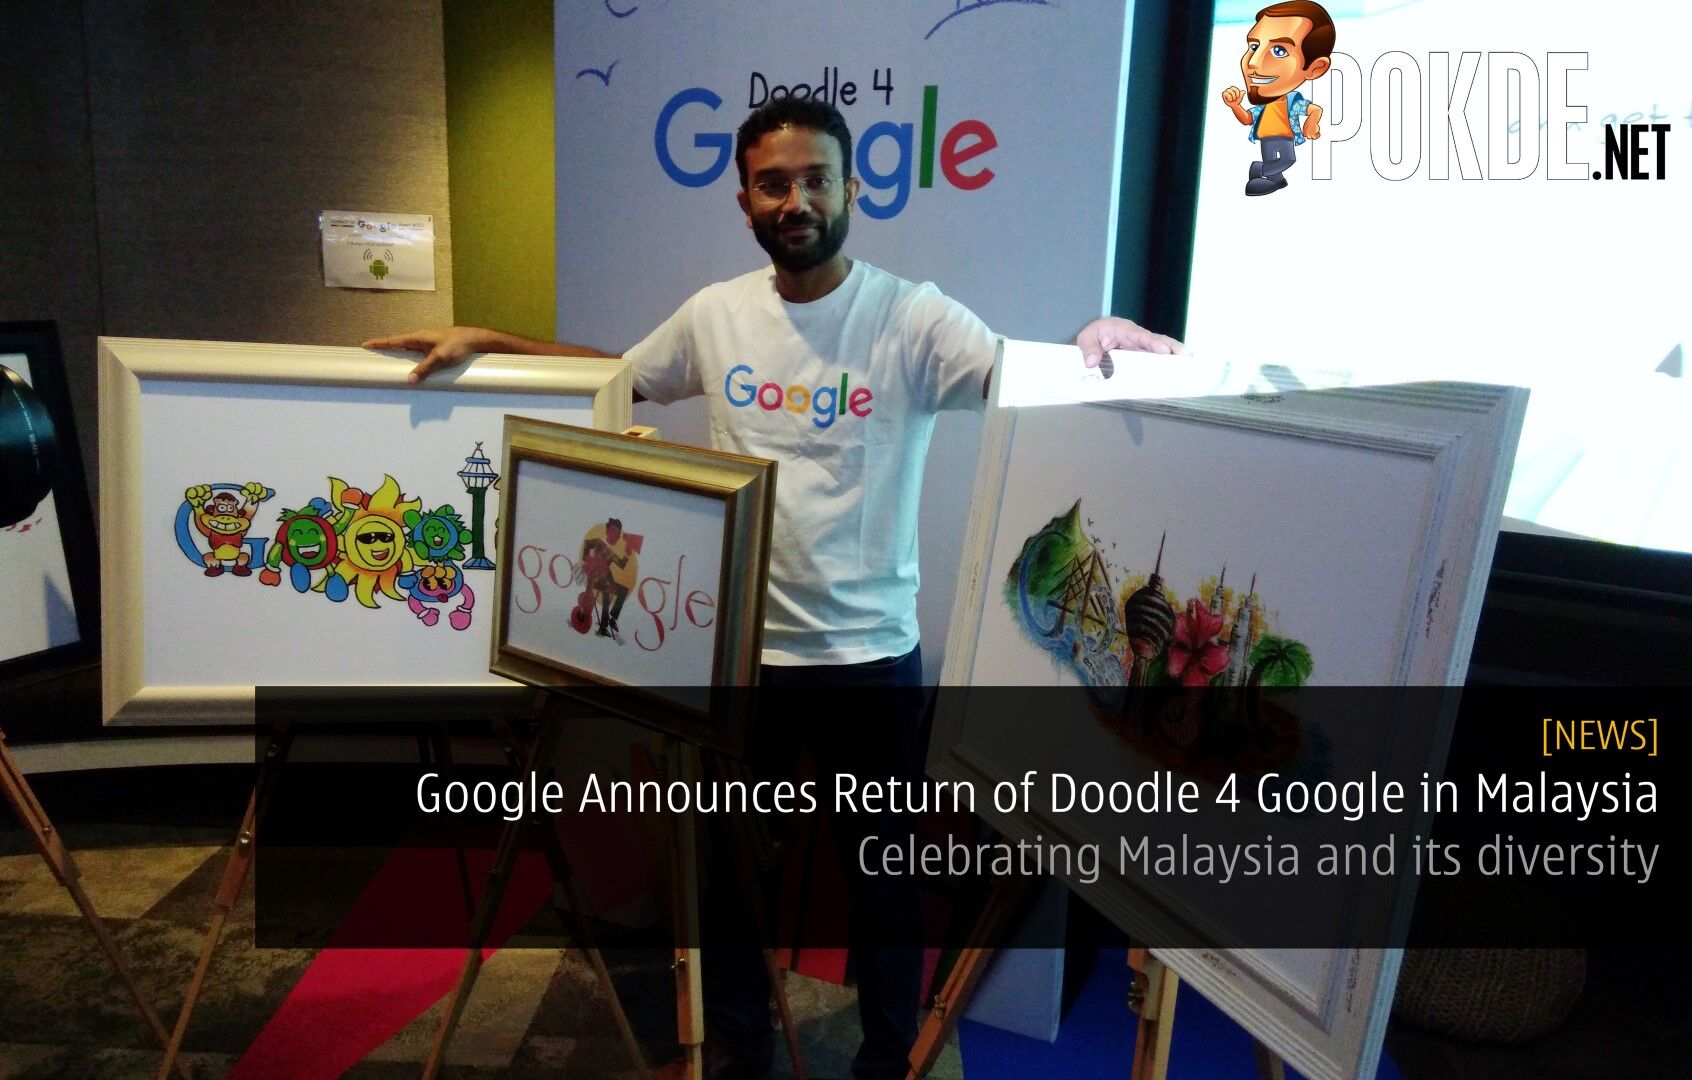 Google Announces Return of Doodle 4 Google in Malaysia - Celebrating Malaysia and its diversity 34